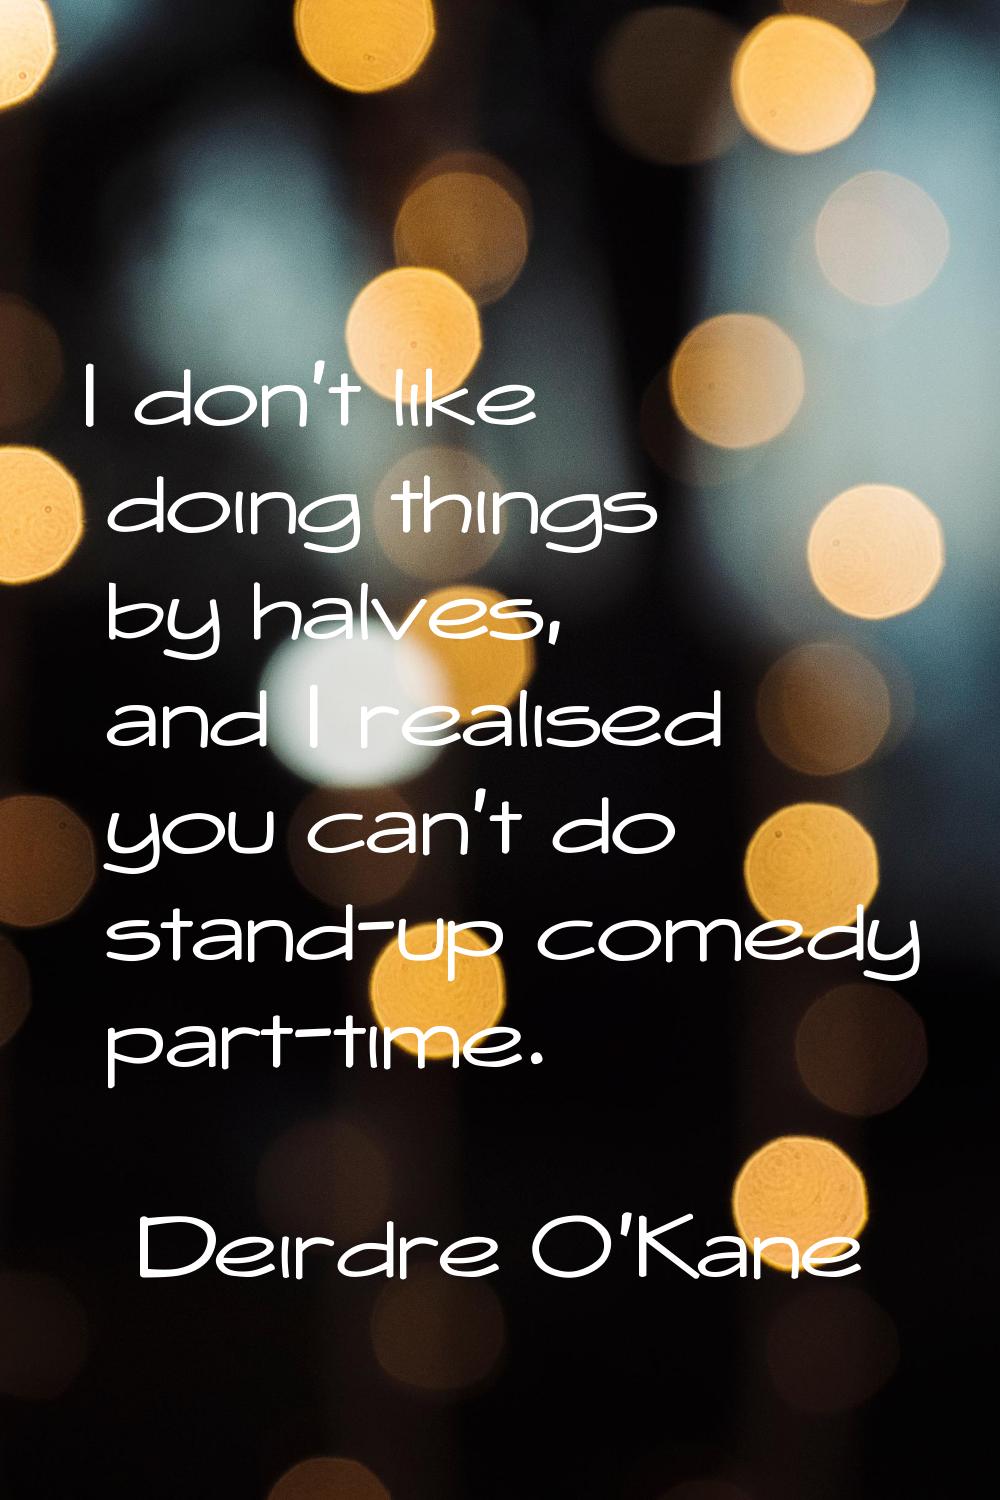 I don't like doing things by halves, and I realised you can't do stand-up comedy part-time.